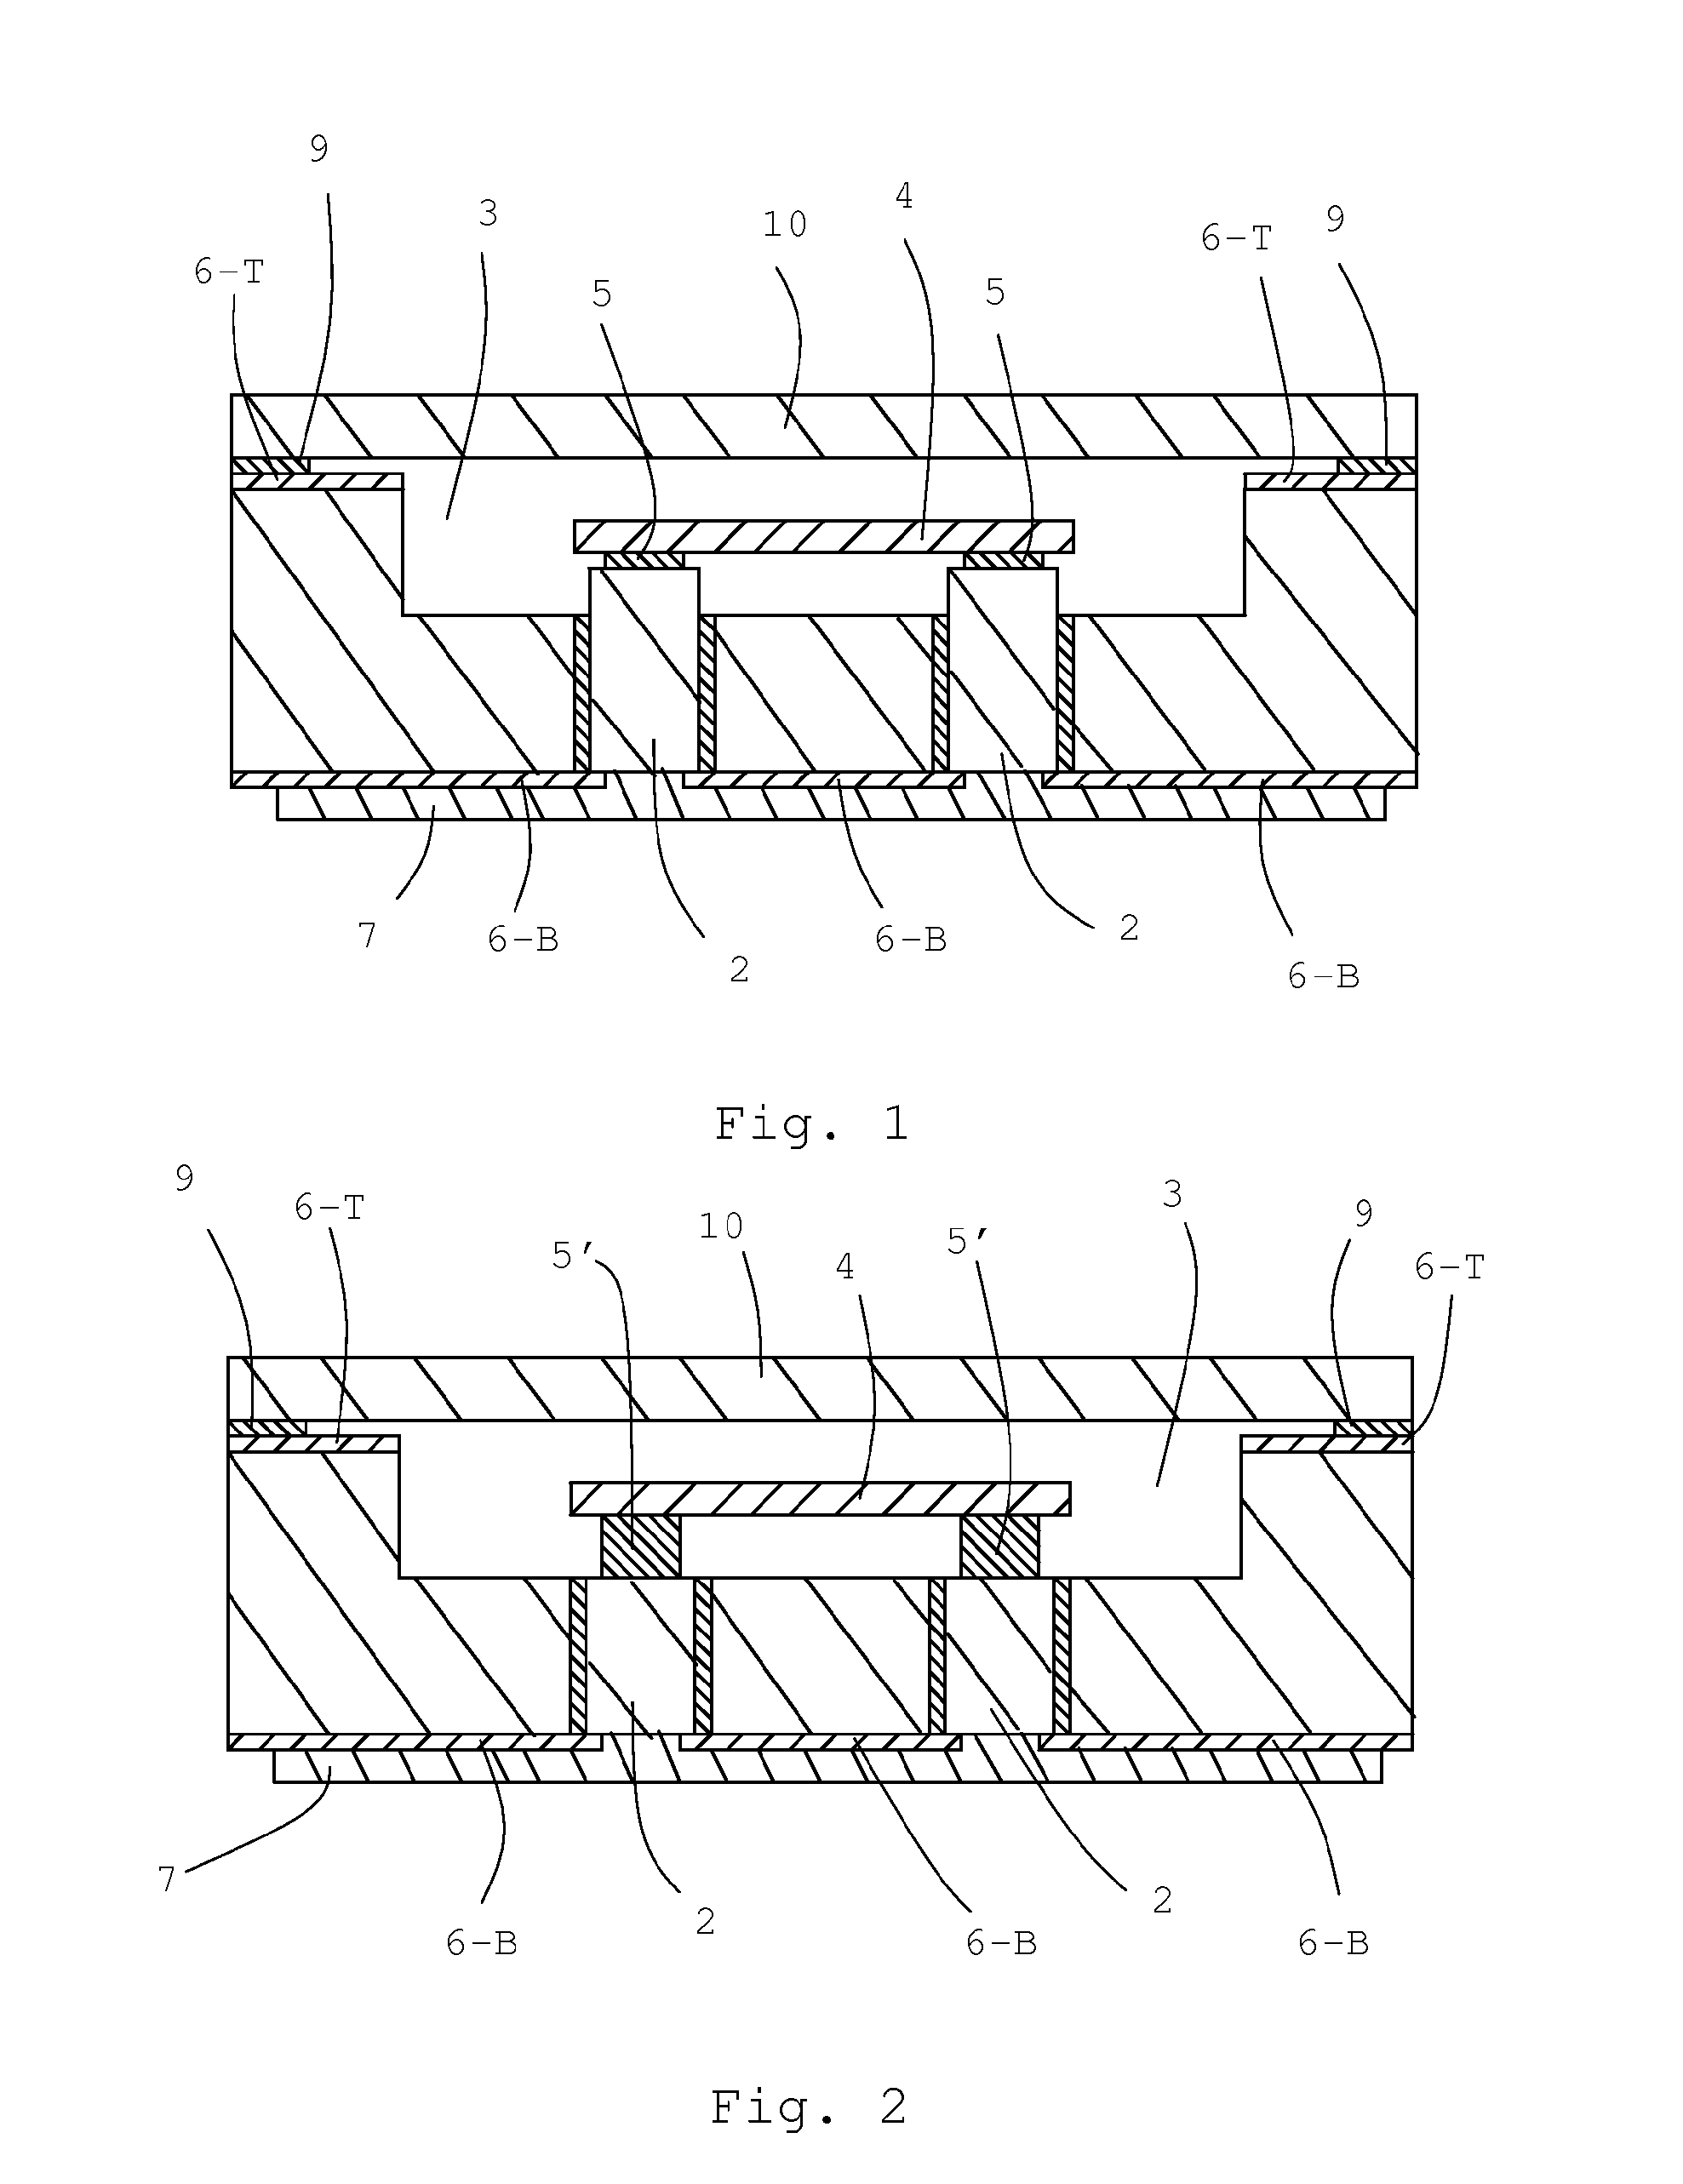 Micropackaging method and devices